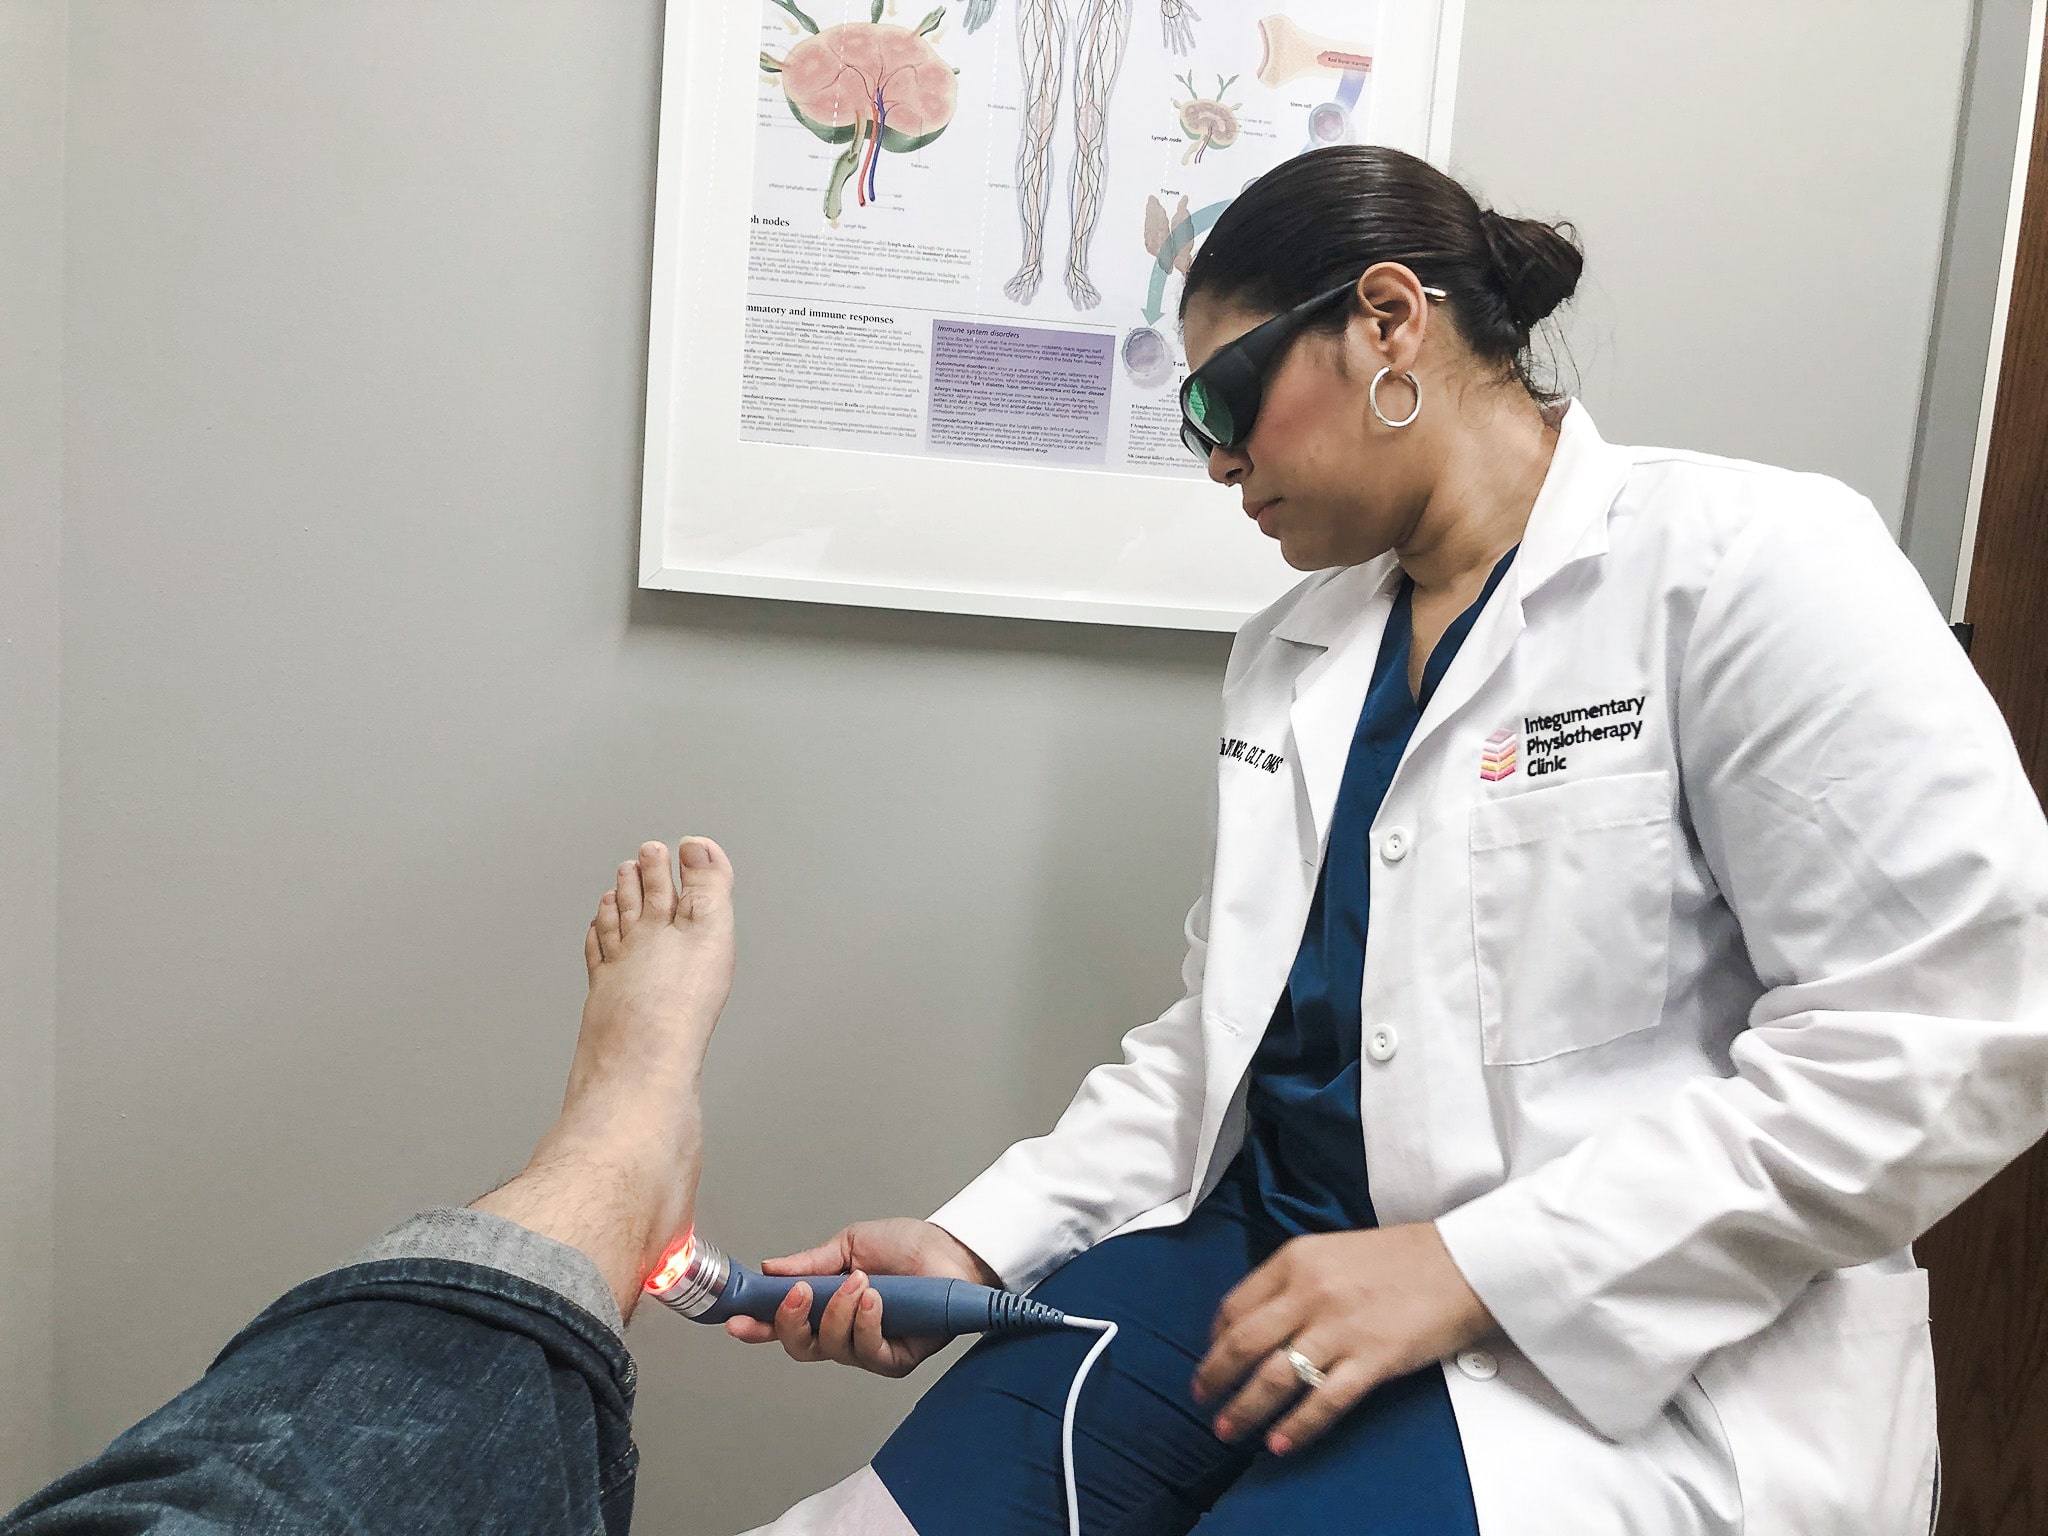 low-level laser therapy on a patient suffering from acute Achilles tendinitis.